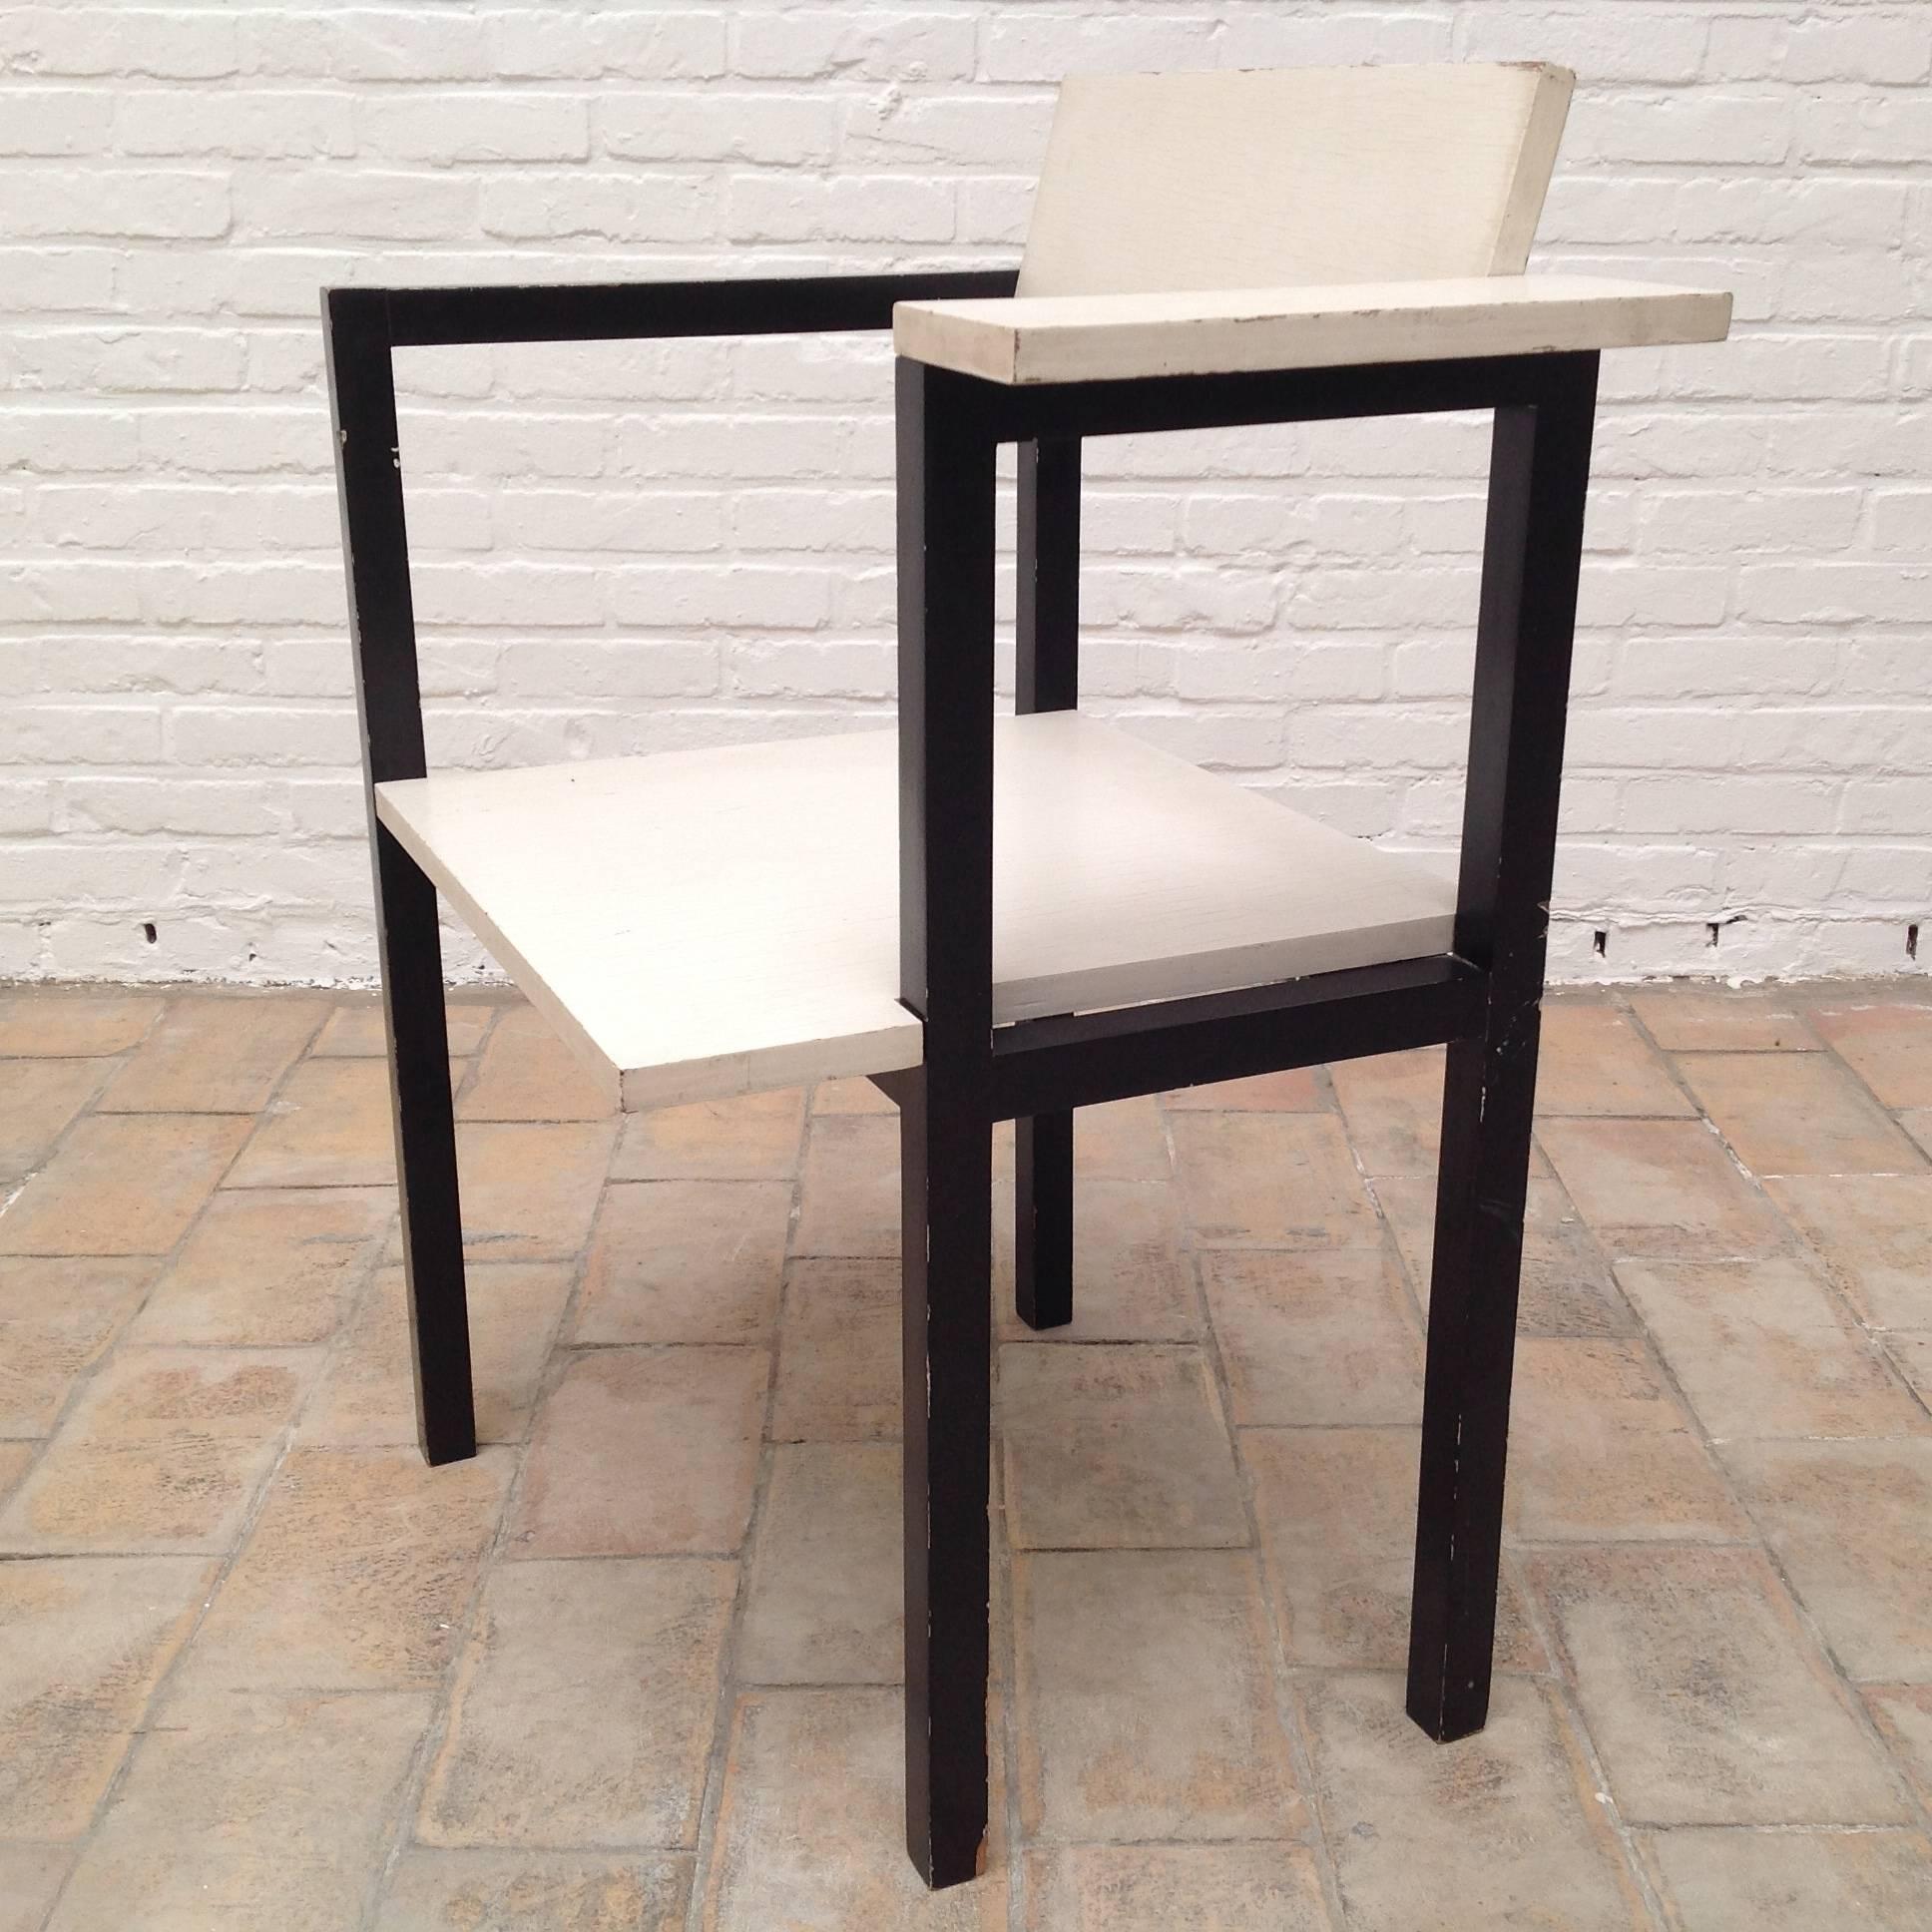 De Stijl Very Rare and Unknown One-Off Chair by Gerrit Rietveld For Sale